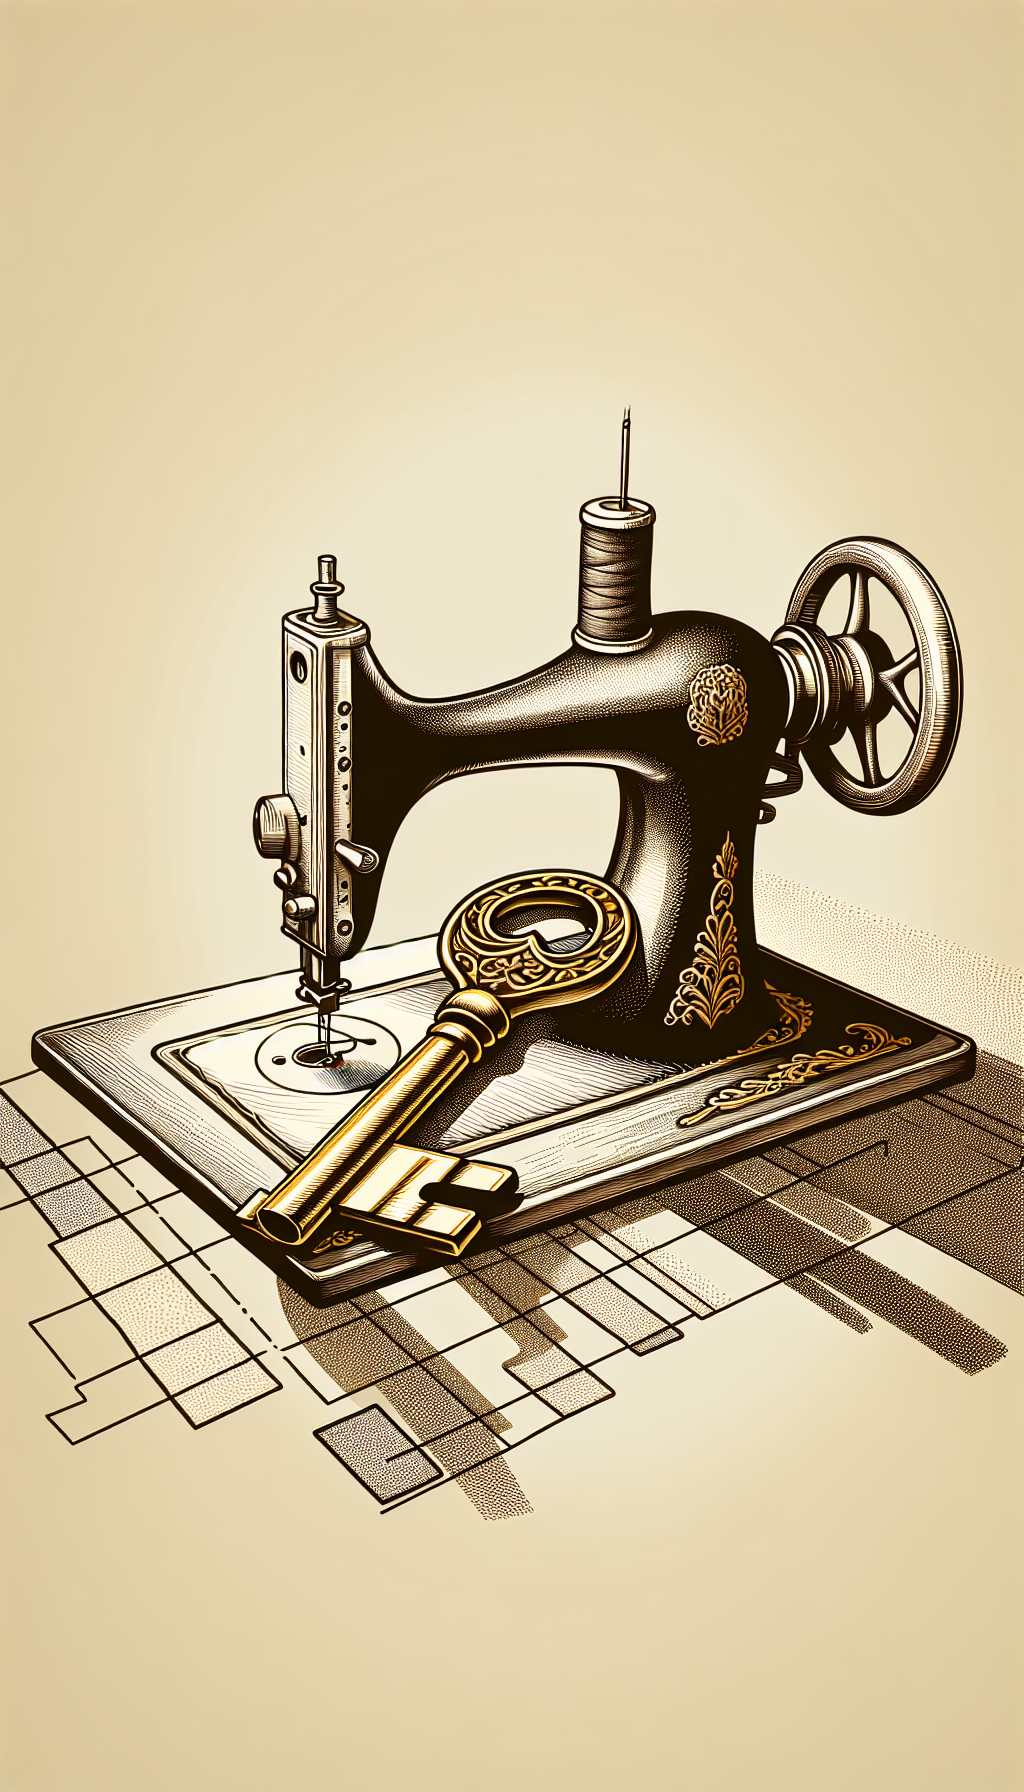 An intricately detailed, sepia-toned line drawing features an ornate, vintage Singer sewing machine with an oversized, shimmering golden key laying across it, symbolizing the 'deciphering' process. The shadows of the machine and key form a bar graph, subtly hinting at rising values, connecting age and rarity to the valuation of antique Singer sewing machines.